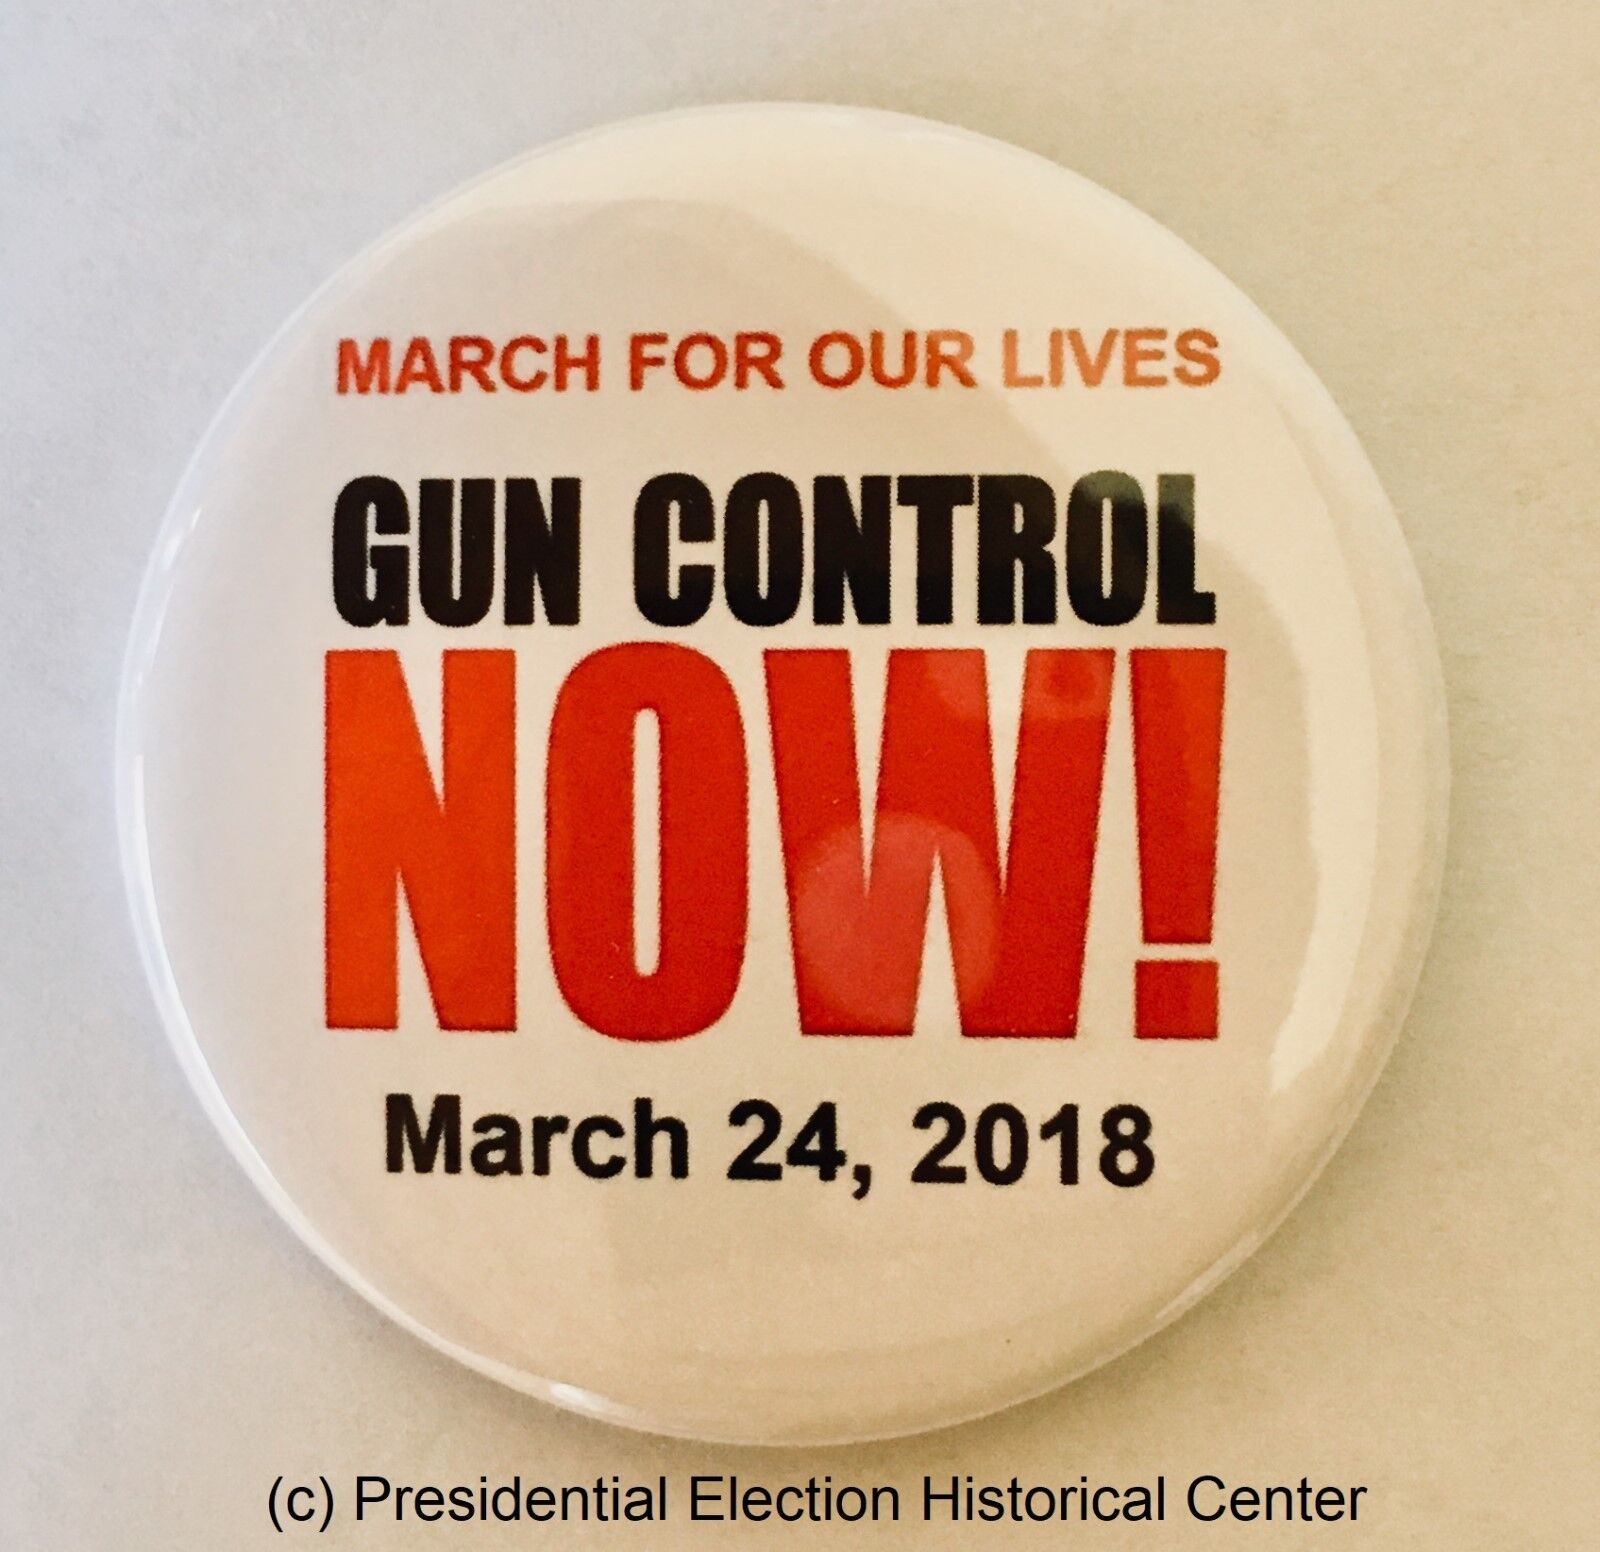 March for Our Lives Gun Control Now March 24, 2018 button (GNCON-701)